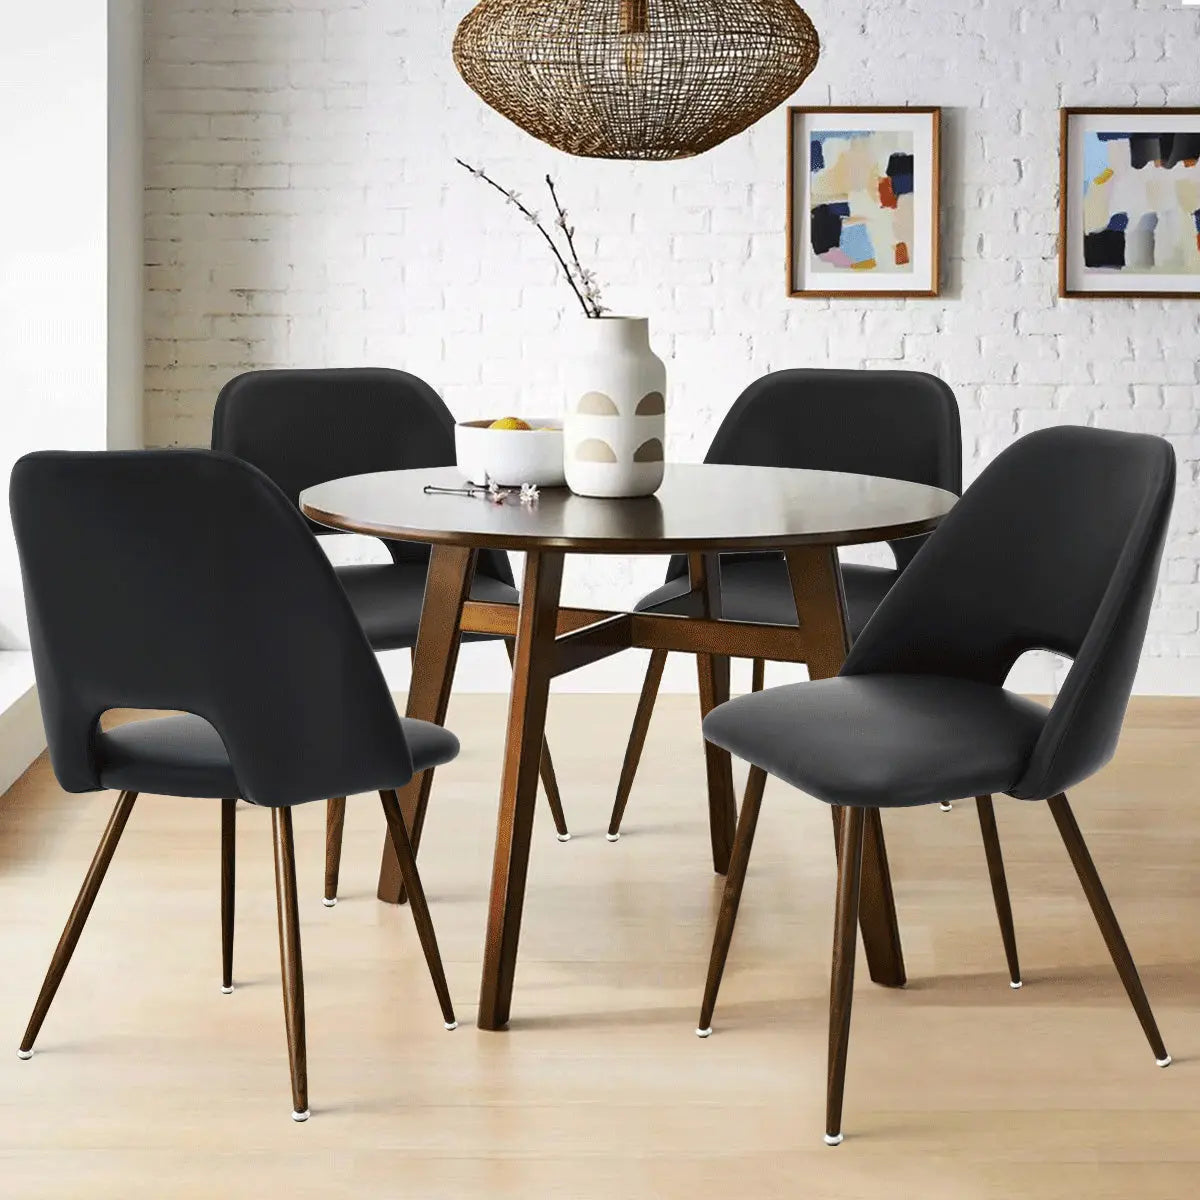 Edwin faux leather dining chairs set of 4 The Pop Maison